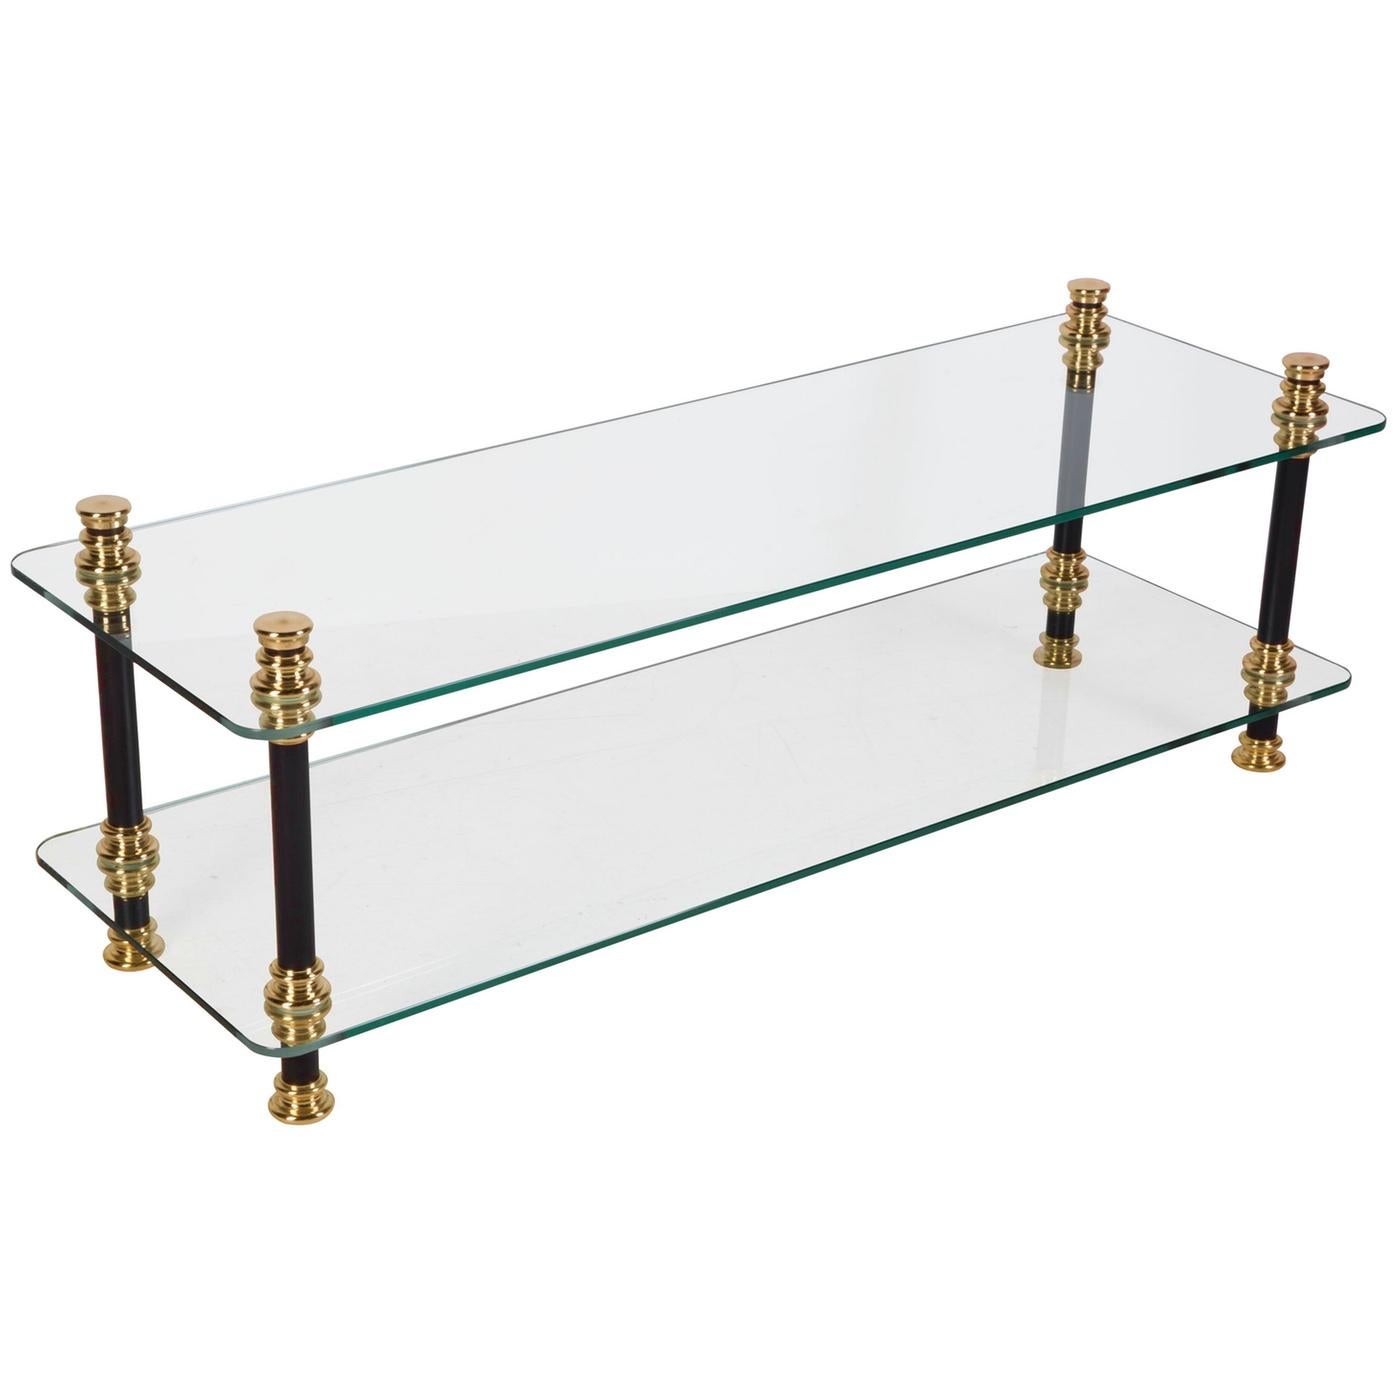 An Andrew Nebbett Designs vintage style low table suitable as a coffee table, bedside table or an audio-visual stand. The glass shelves are made for 10mm thick, toughened glass. This table is tailor-made to order and is handmade, coloured and